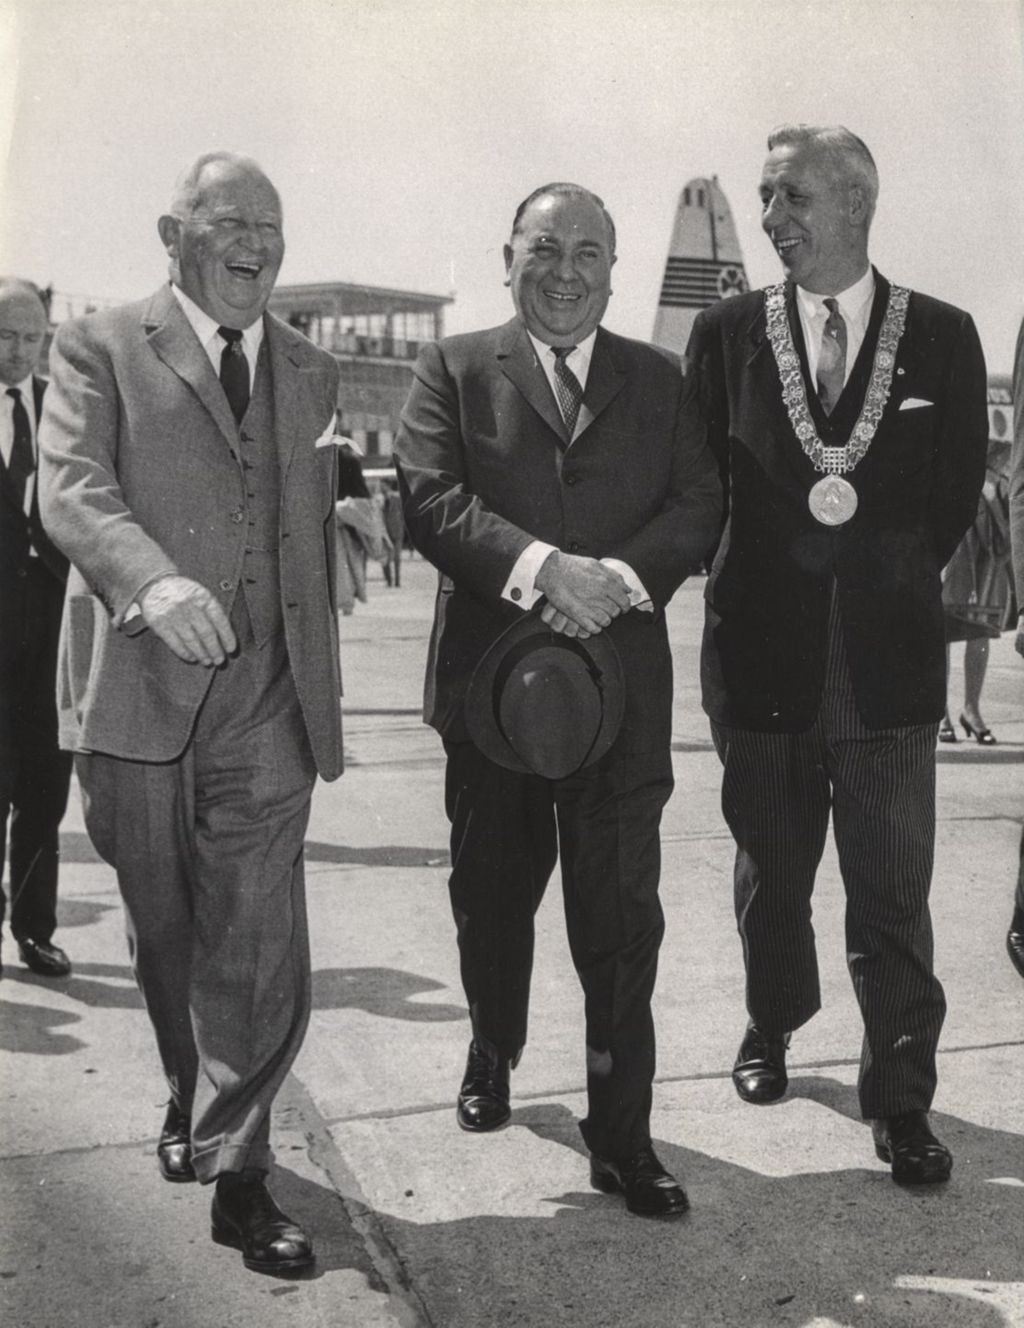 Miniature of Trip to Ireland, Richard J. Daley, with the Lord Mayor of Dublin at the Dublin airport